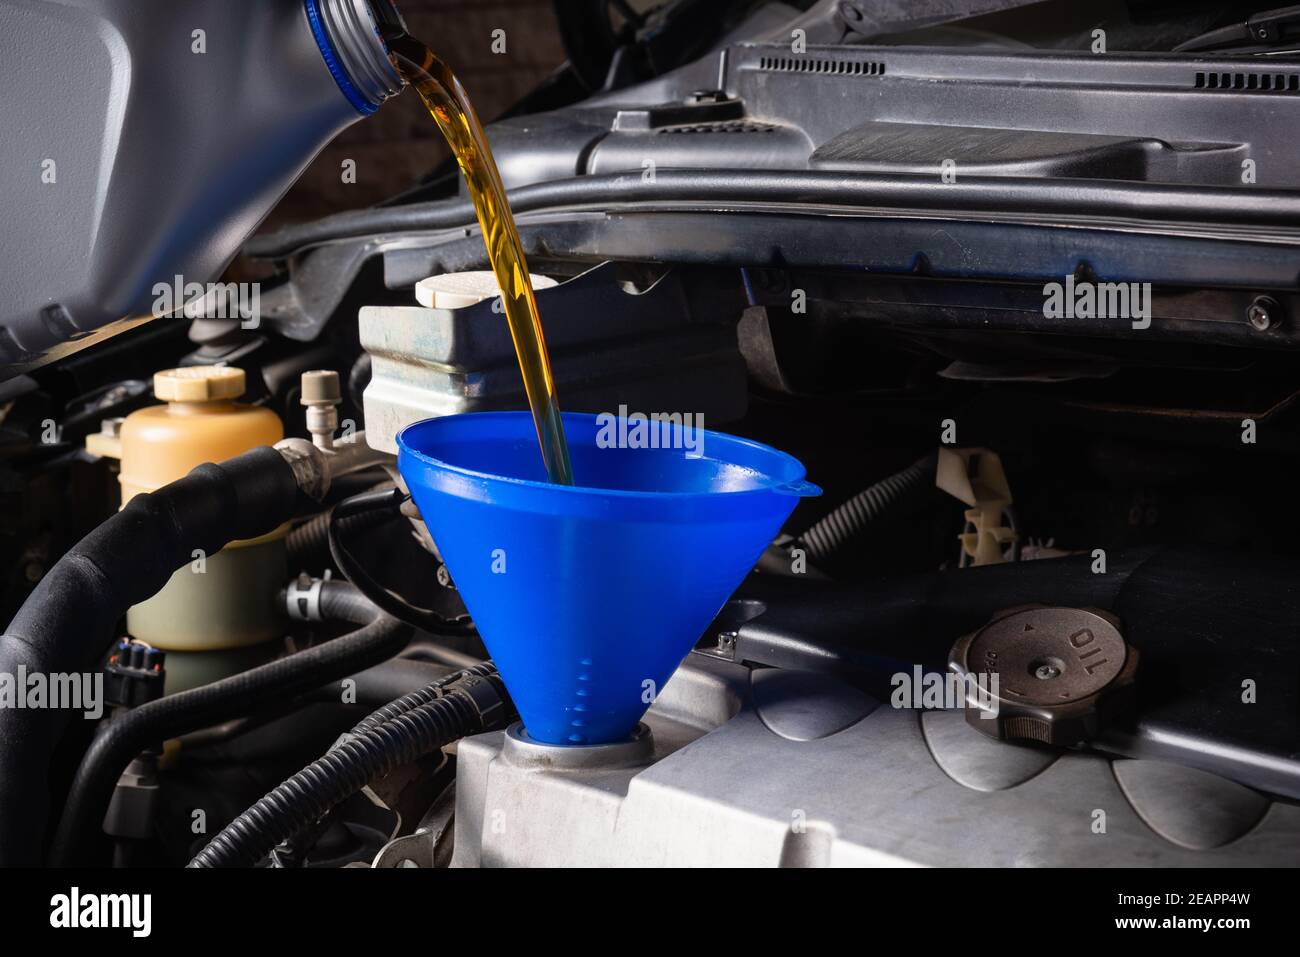 Mechanic in service to repair the car, change lubricant oil Stock Photo